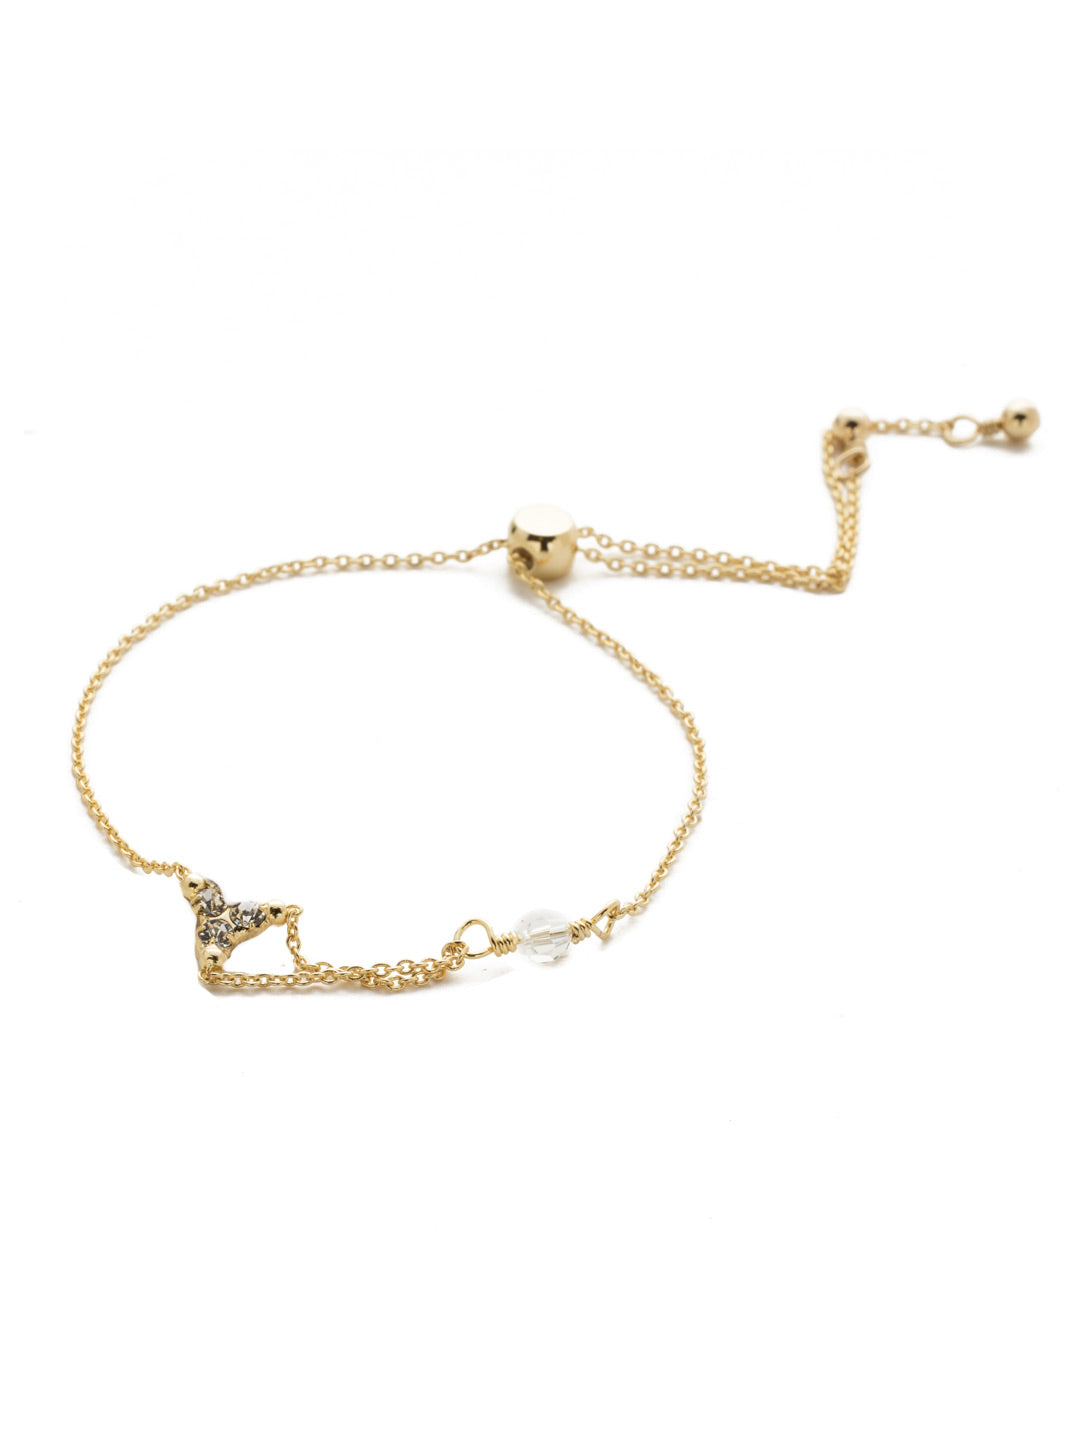 Halia Trinity Crystal Slider Bracelet - 4BEK6BGCRY - <p>Fun and flirty with just a bit of shimmer and a cute single bead, slide on this bracelet when you want just a touch of whimsy. From Sorrelli's Crystal collection in our Bright Gold-tone finish.</p>